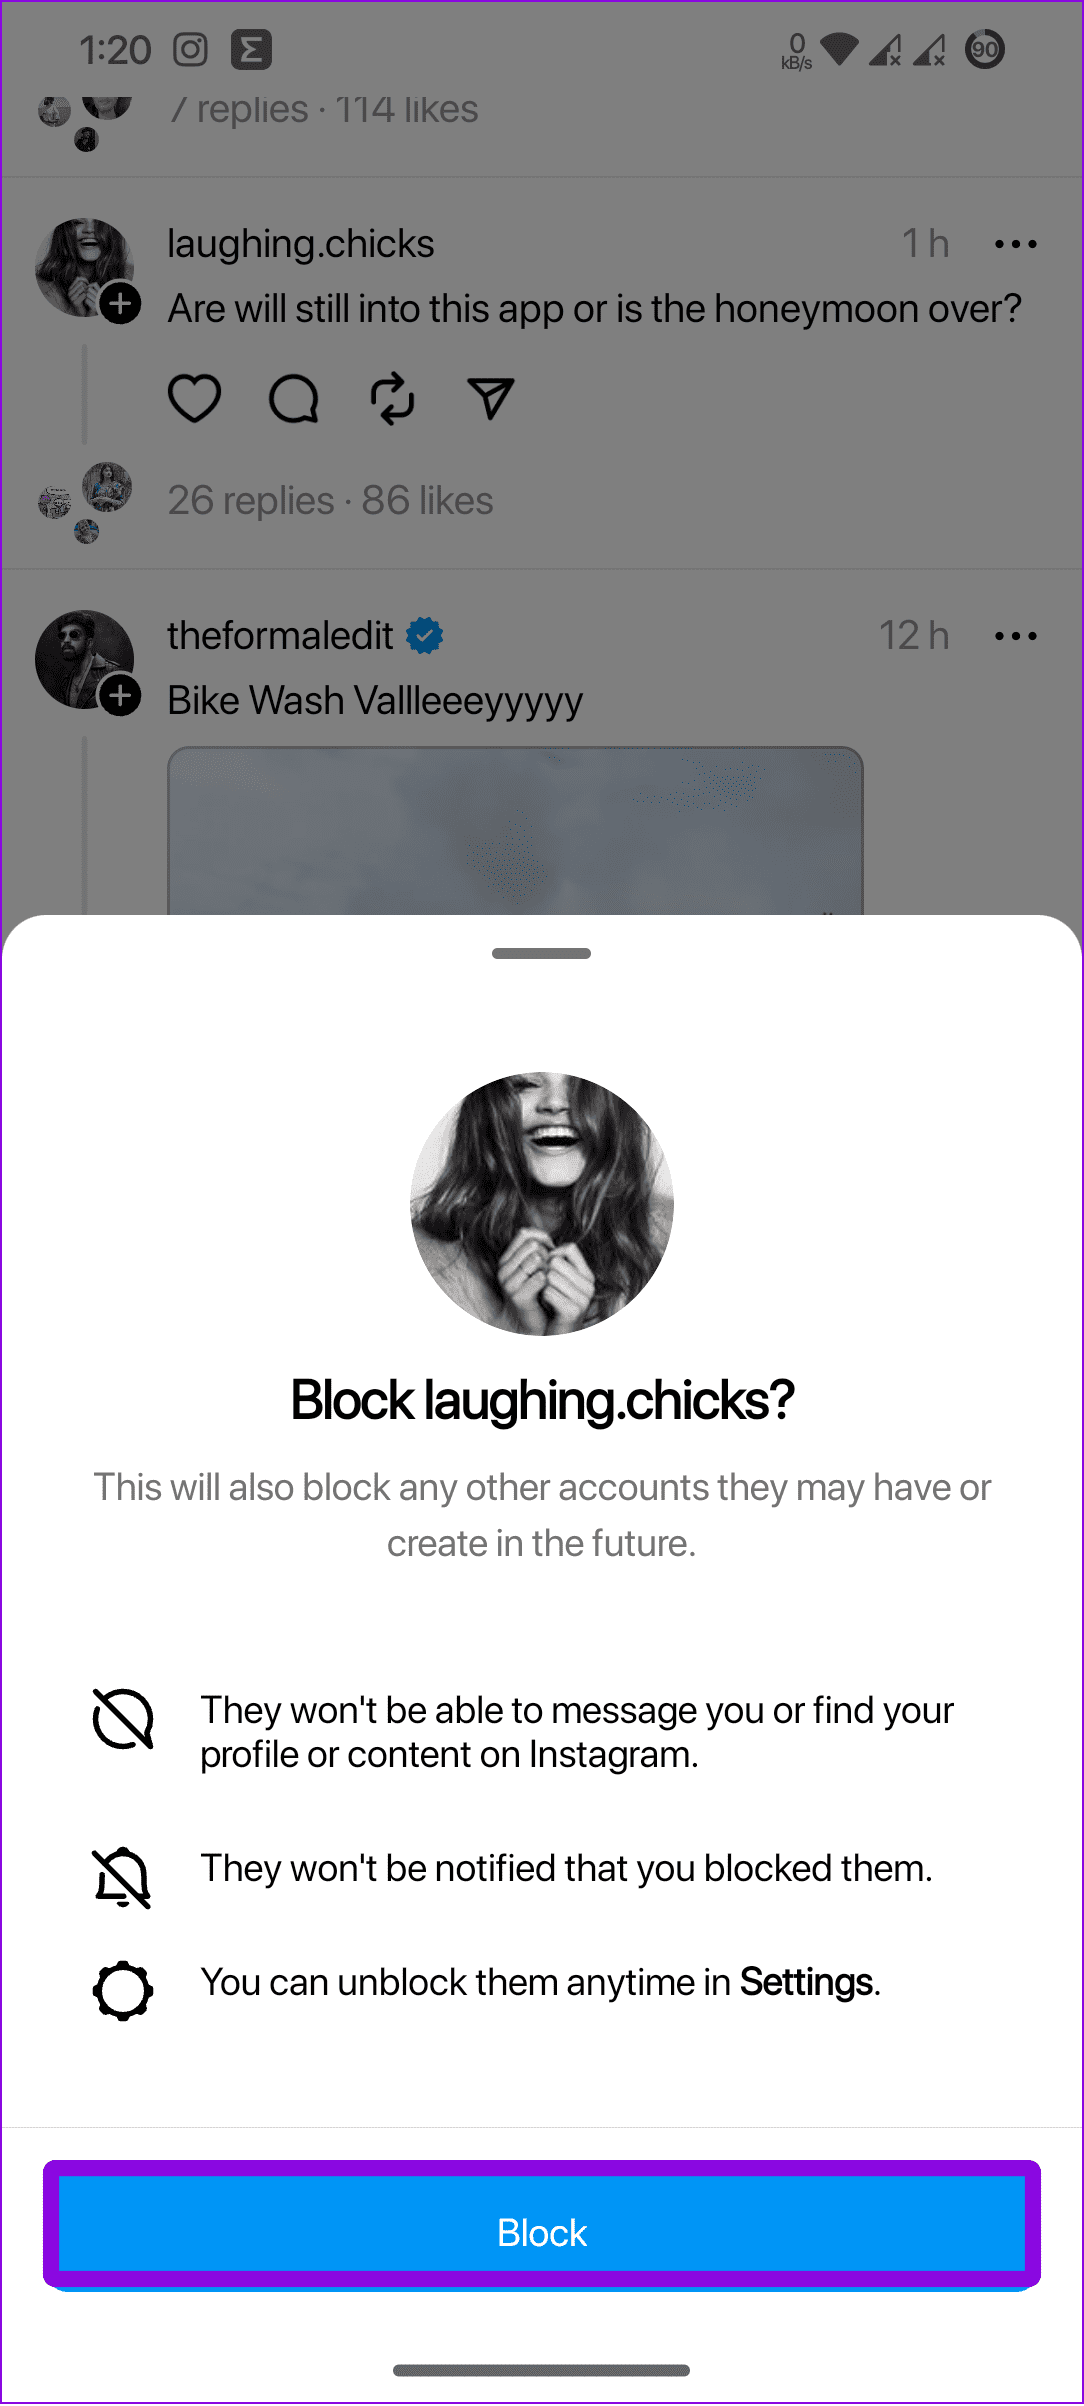 choose Block to confirm